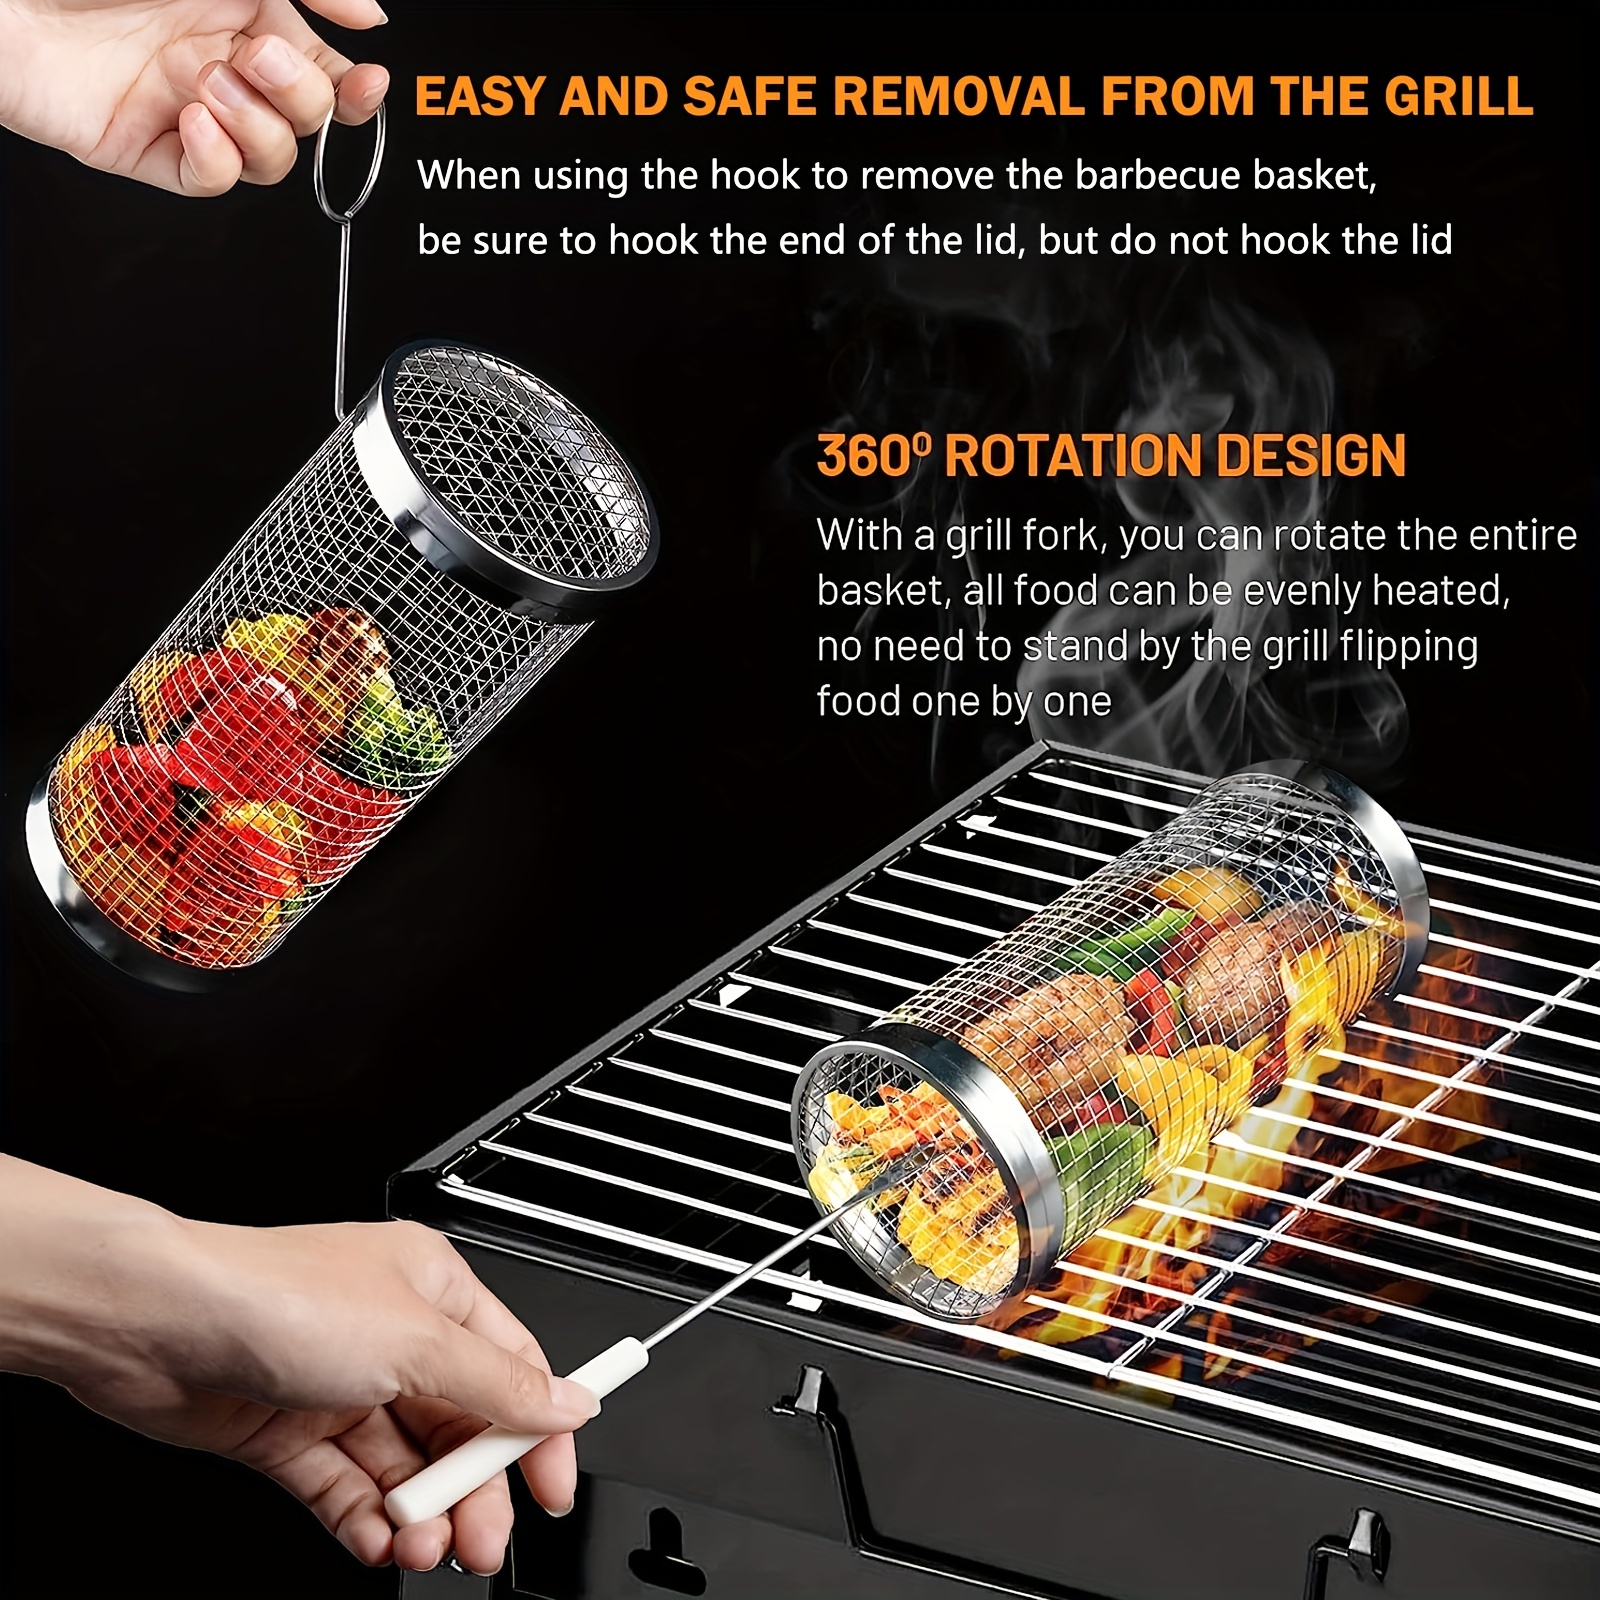 Stainless Steel BBQ Grills Outdoor Portable Electric Barbecue